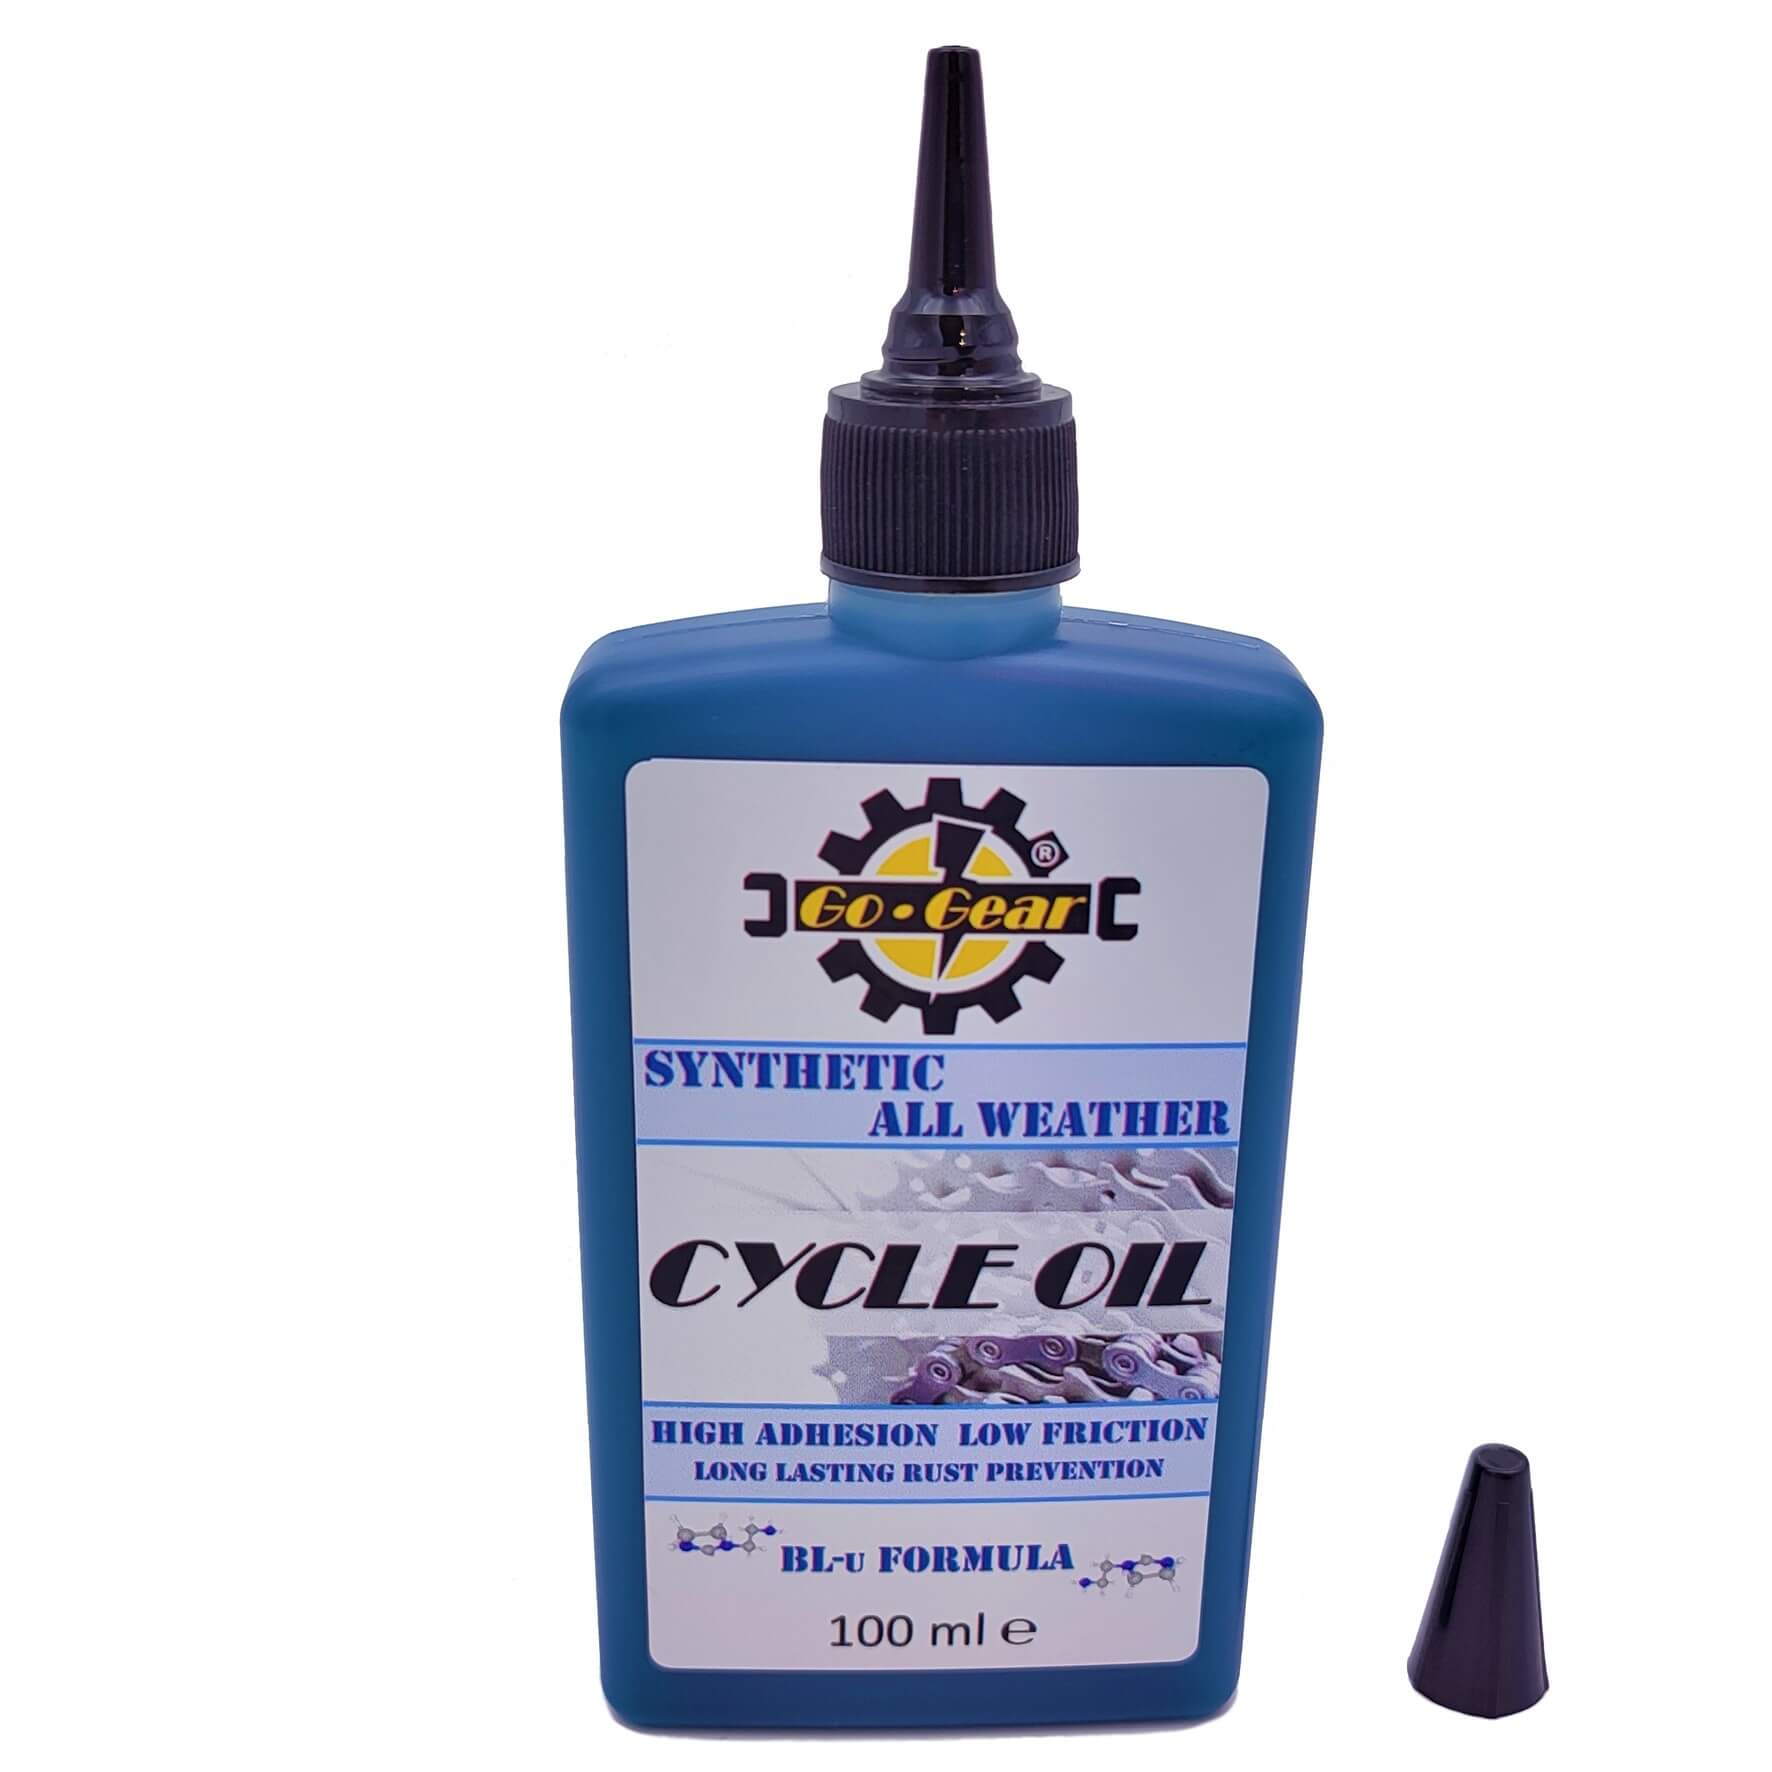 Cycle & Chain Oil For Bikes - Synthetic All Weather Version (100ml)